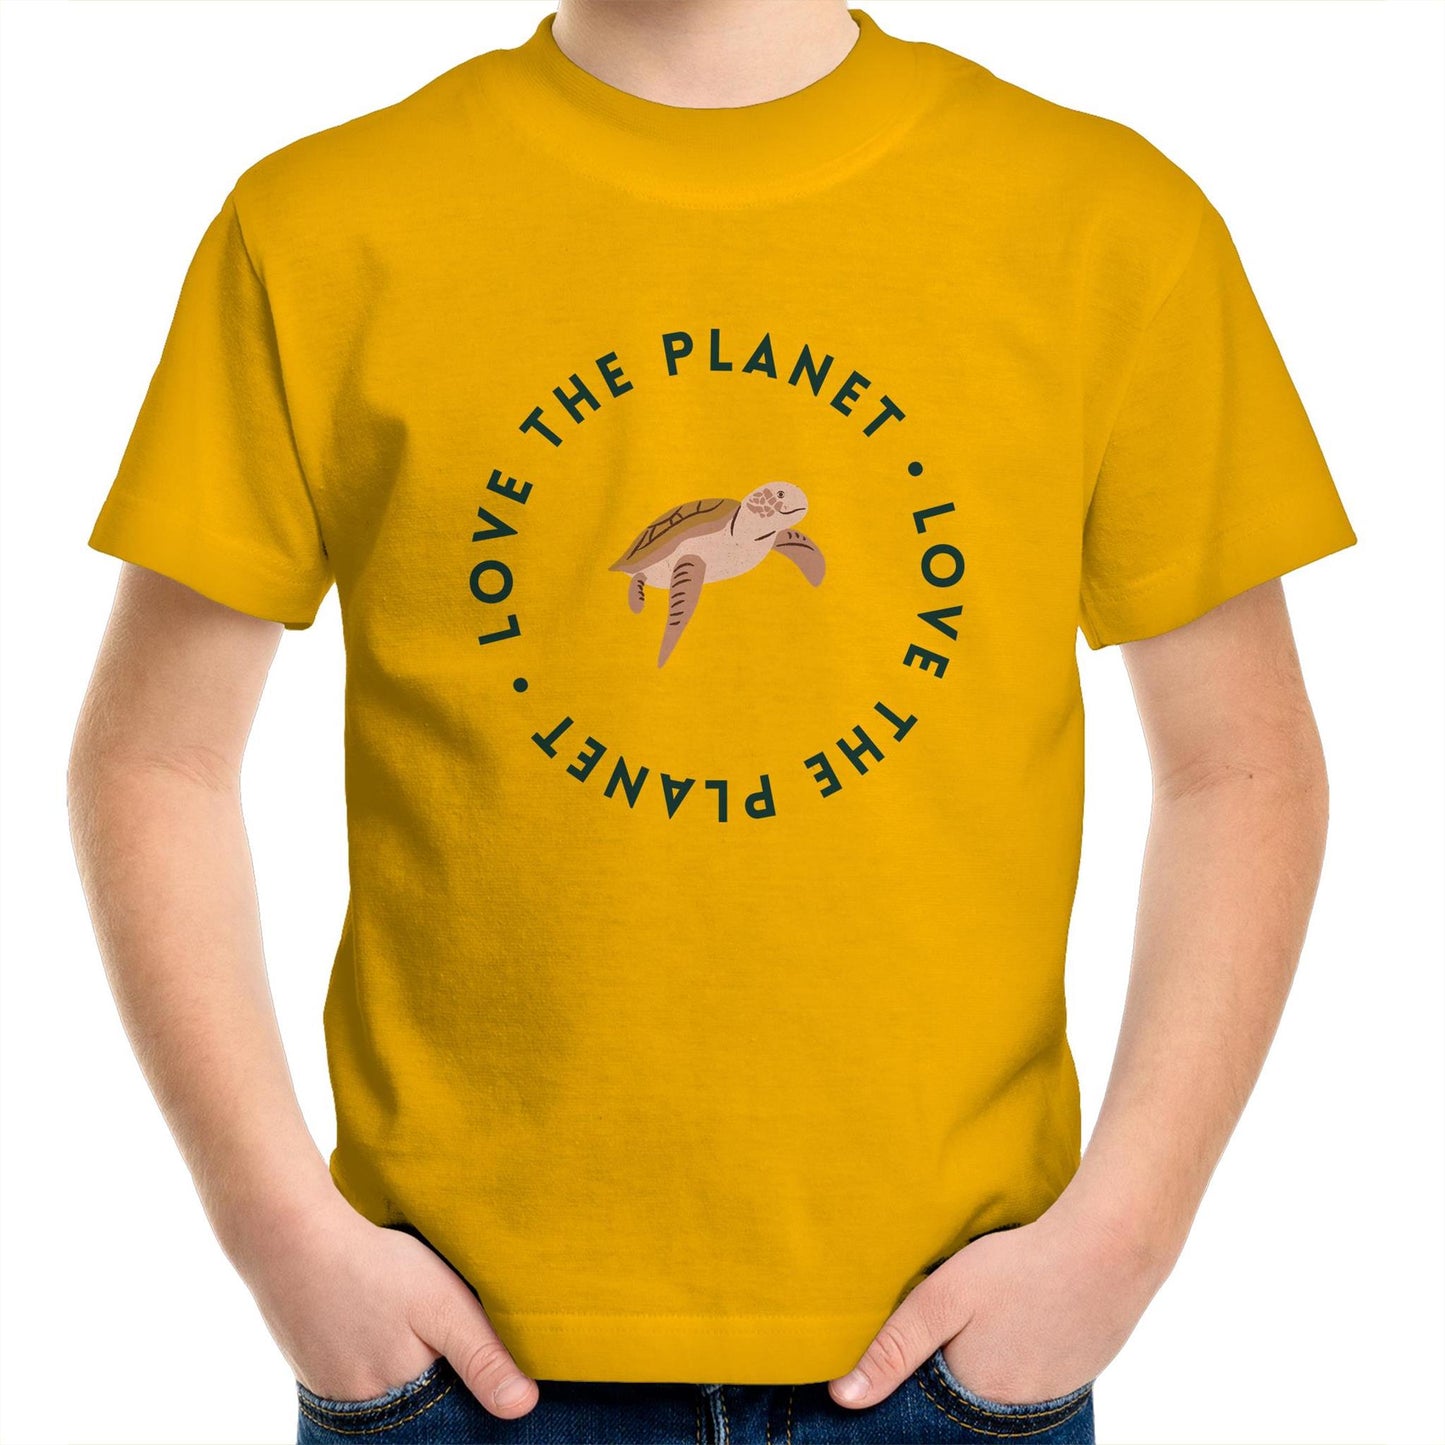 Love The Planet - Kids Youth Crew T-Shirt Gold Kids Youth T-shirt animal Environment